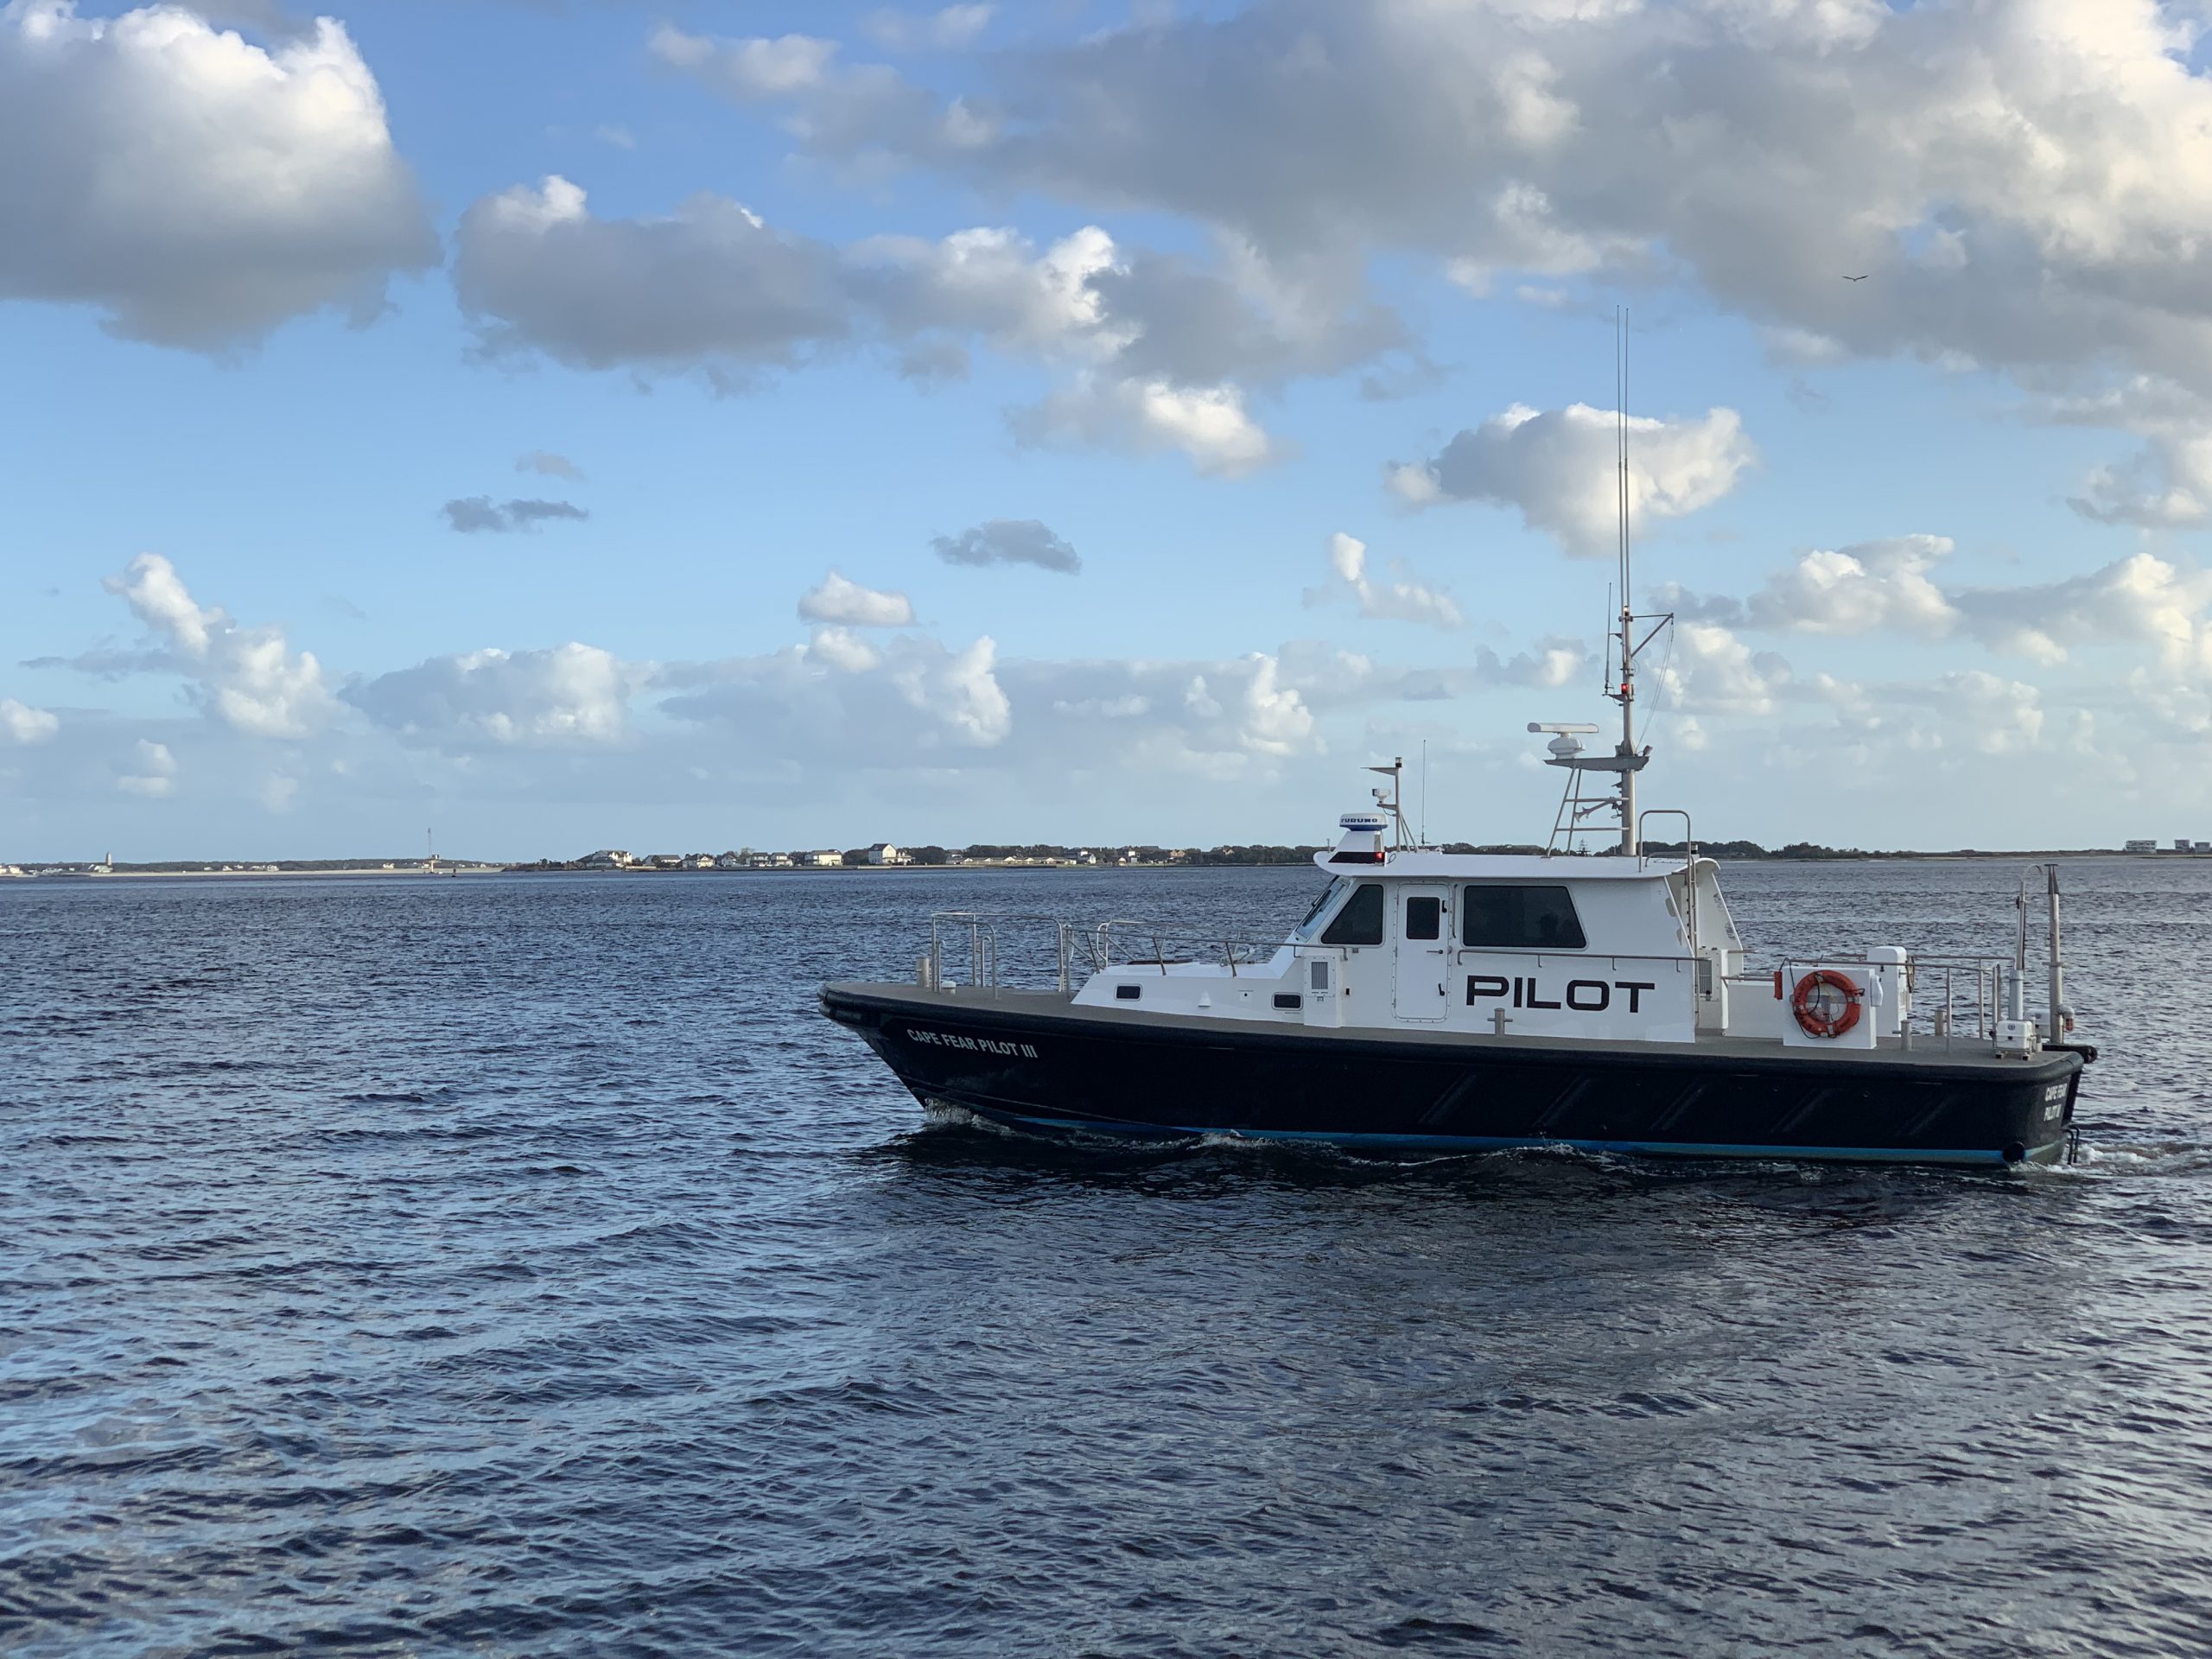 light blue sky with grey clouds over mostly calm waters with a black and white boat with "pilot" written in black on the side